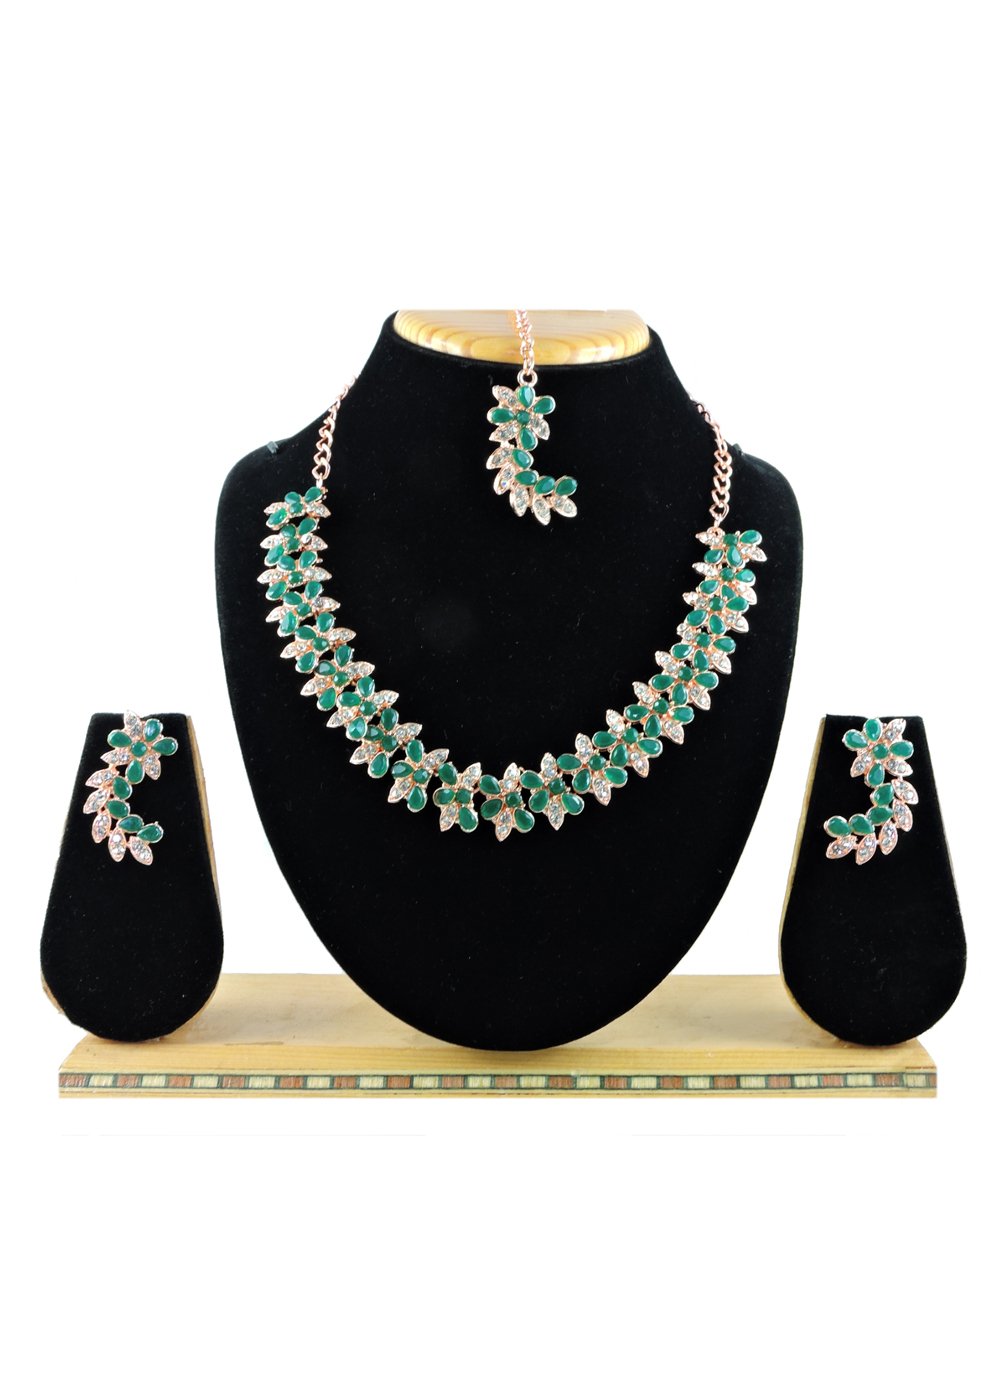 Outstanding Gold Rodium Polish Green and White Necklace Set For Party